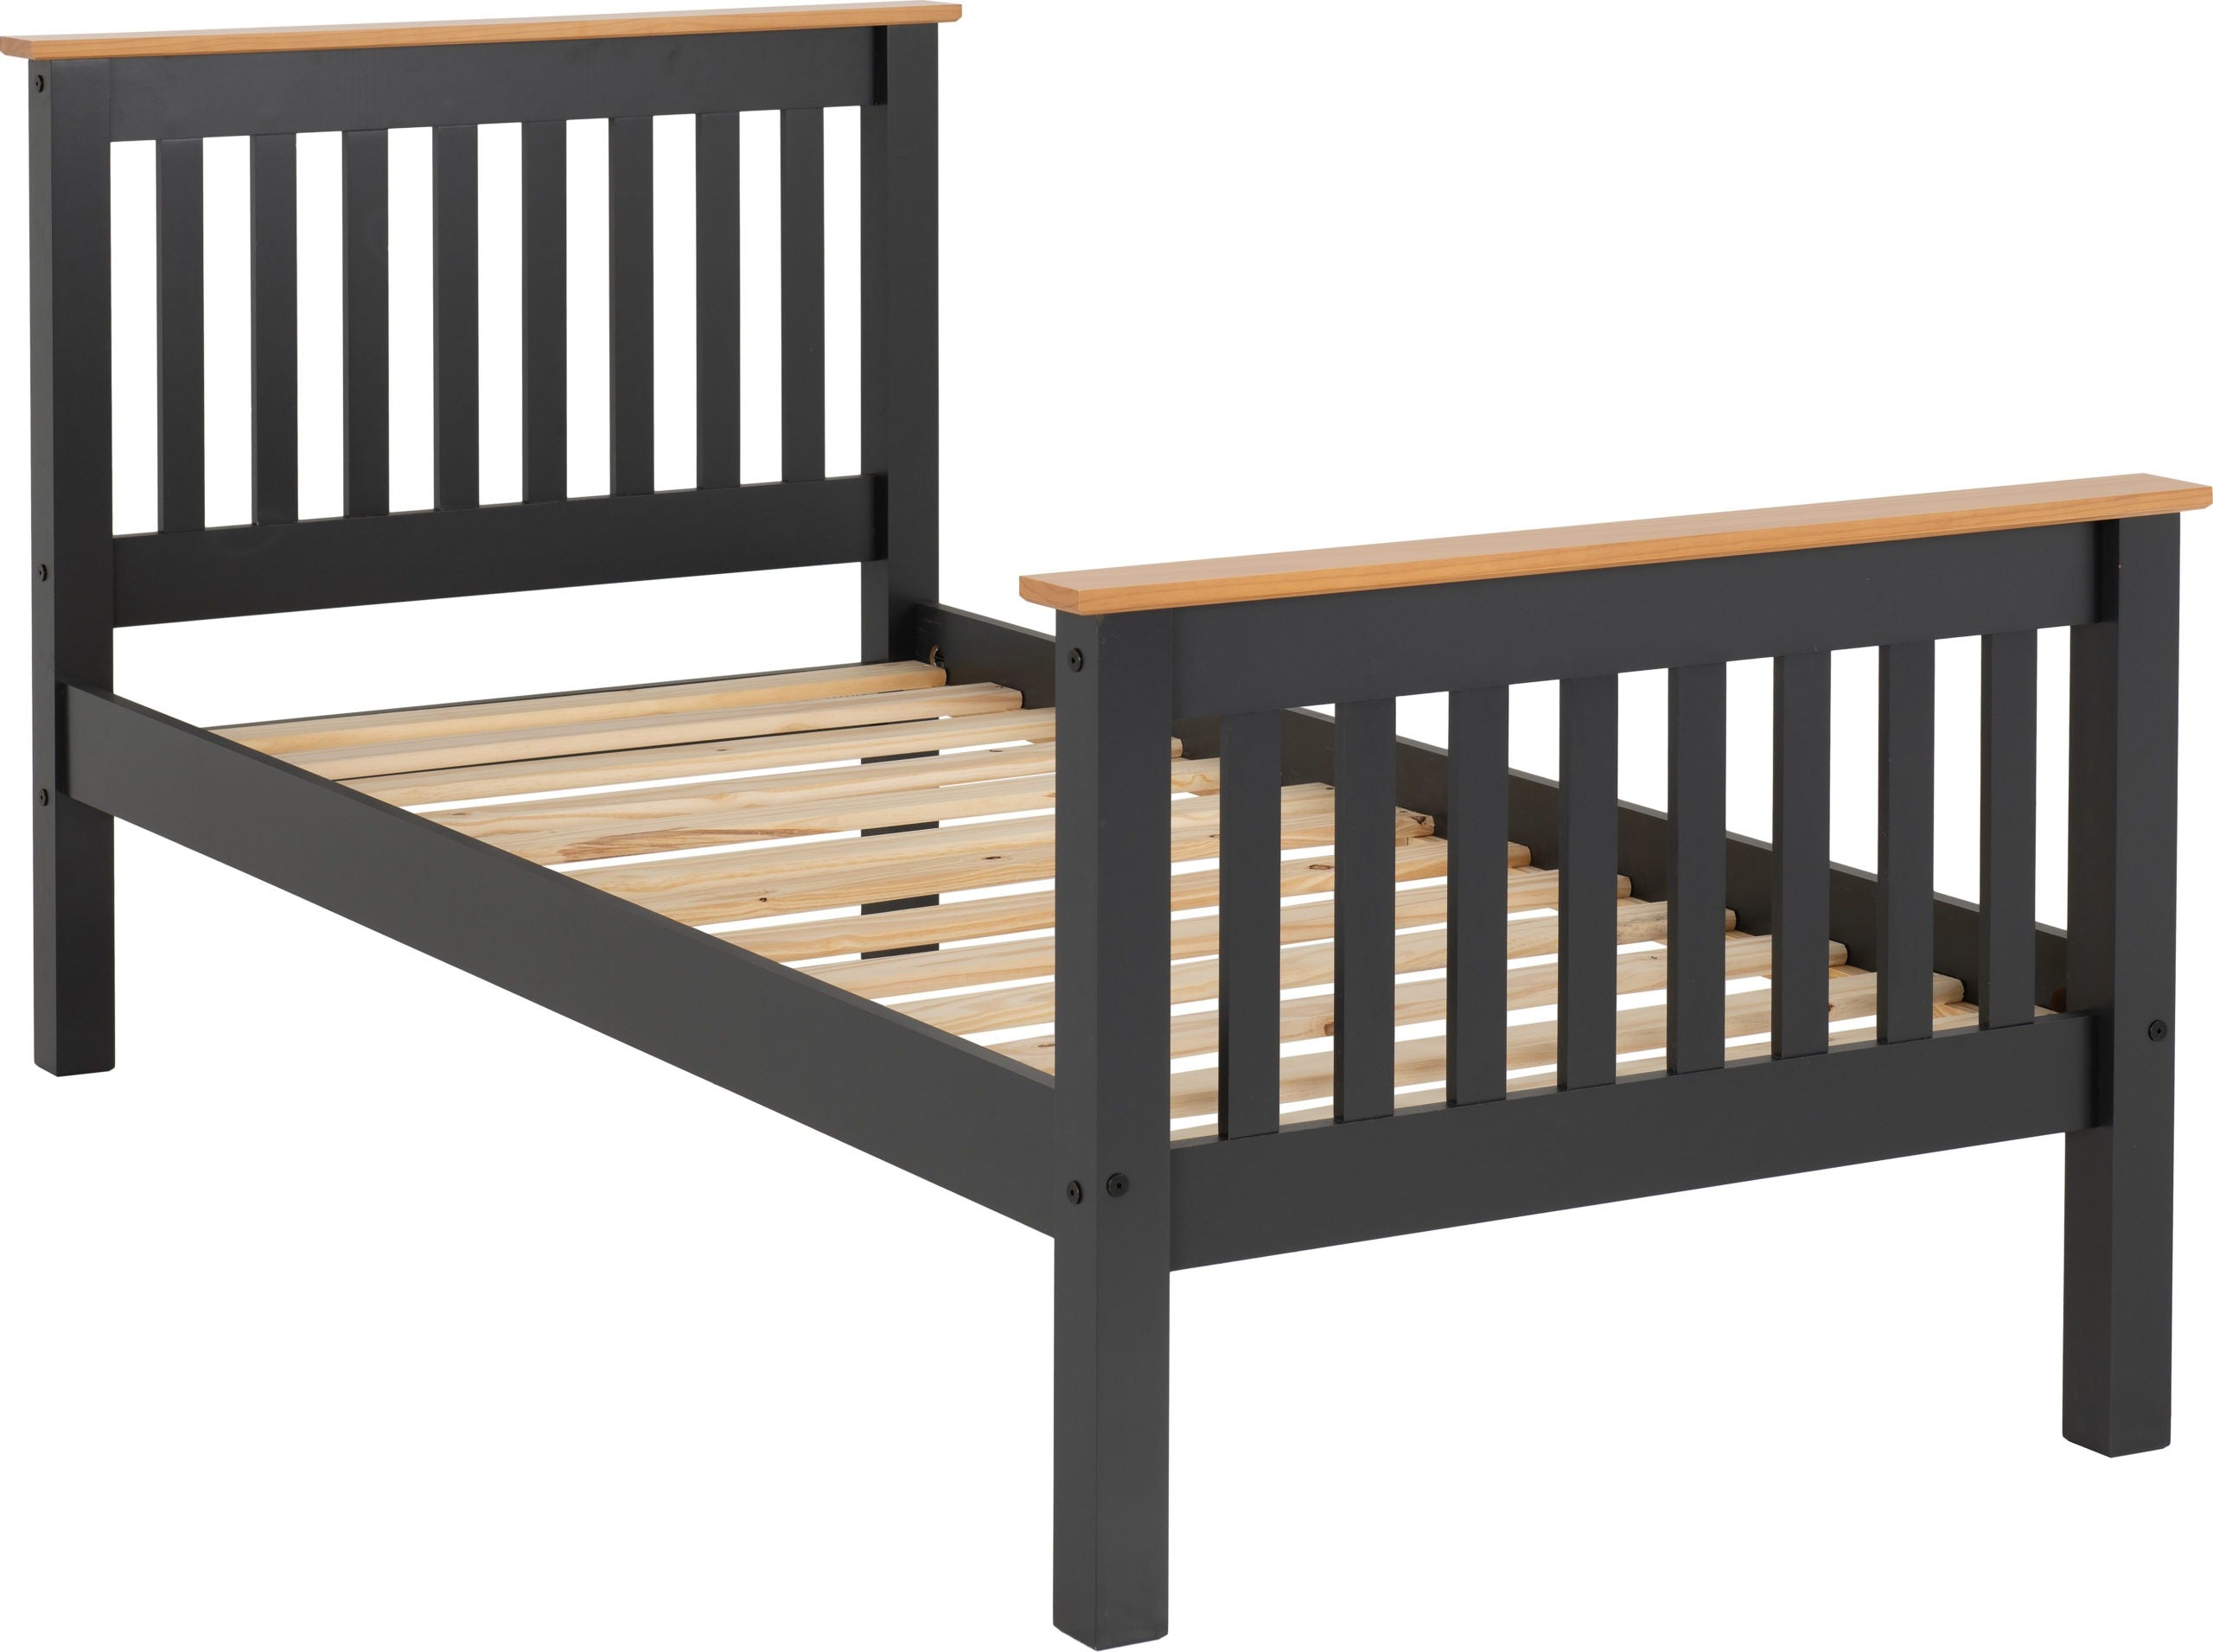 Monaco 3ft Single Bed High Foot End in Grey and Oak